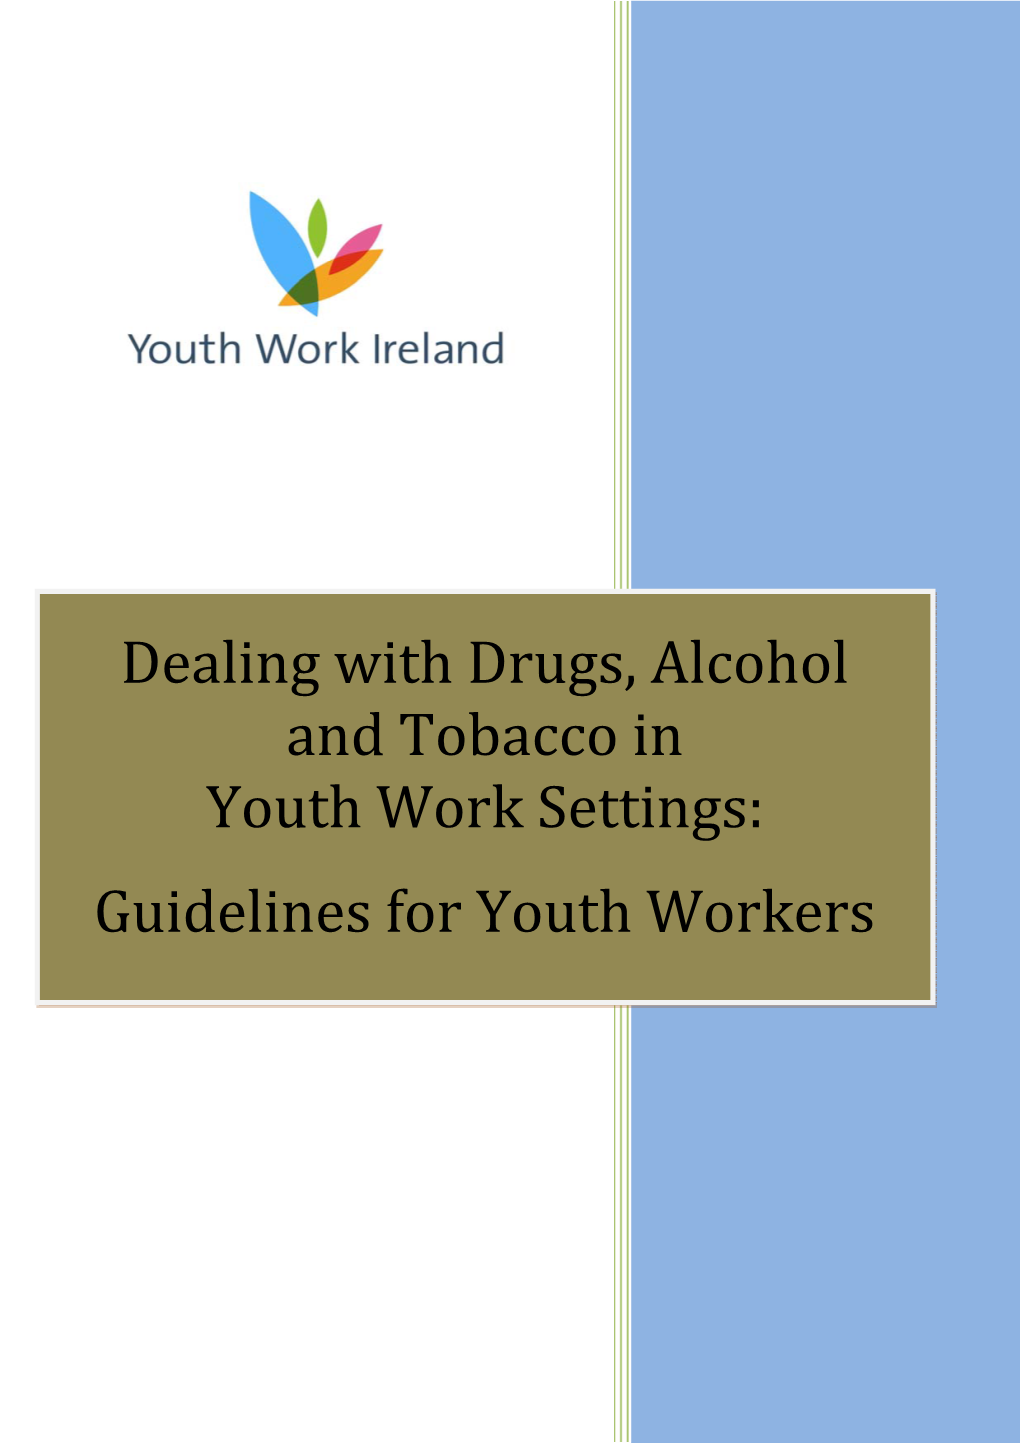 PDF (Dealing with Drugs, Alcohol and Tobacco in Youth Work Settings